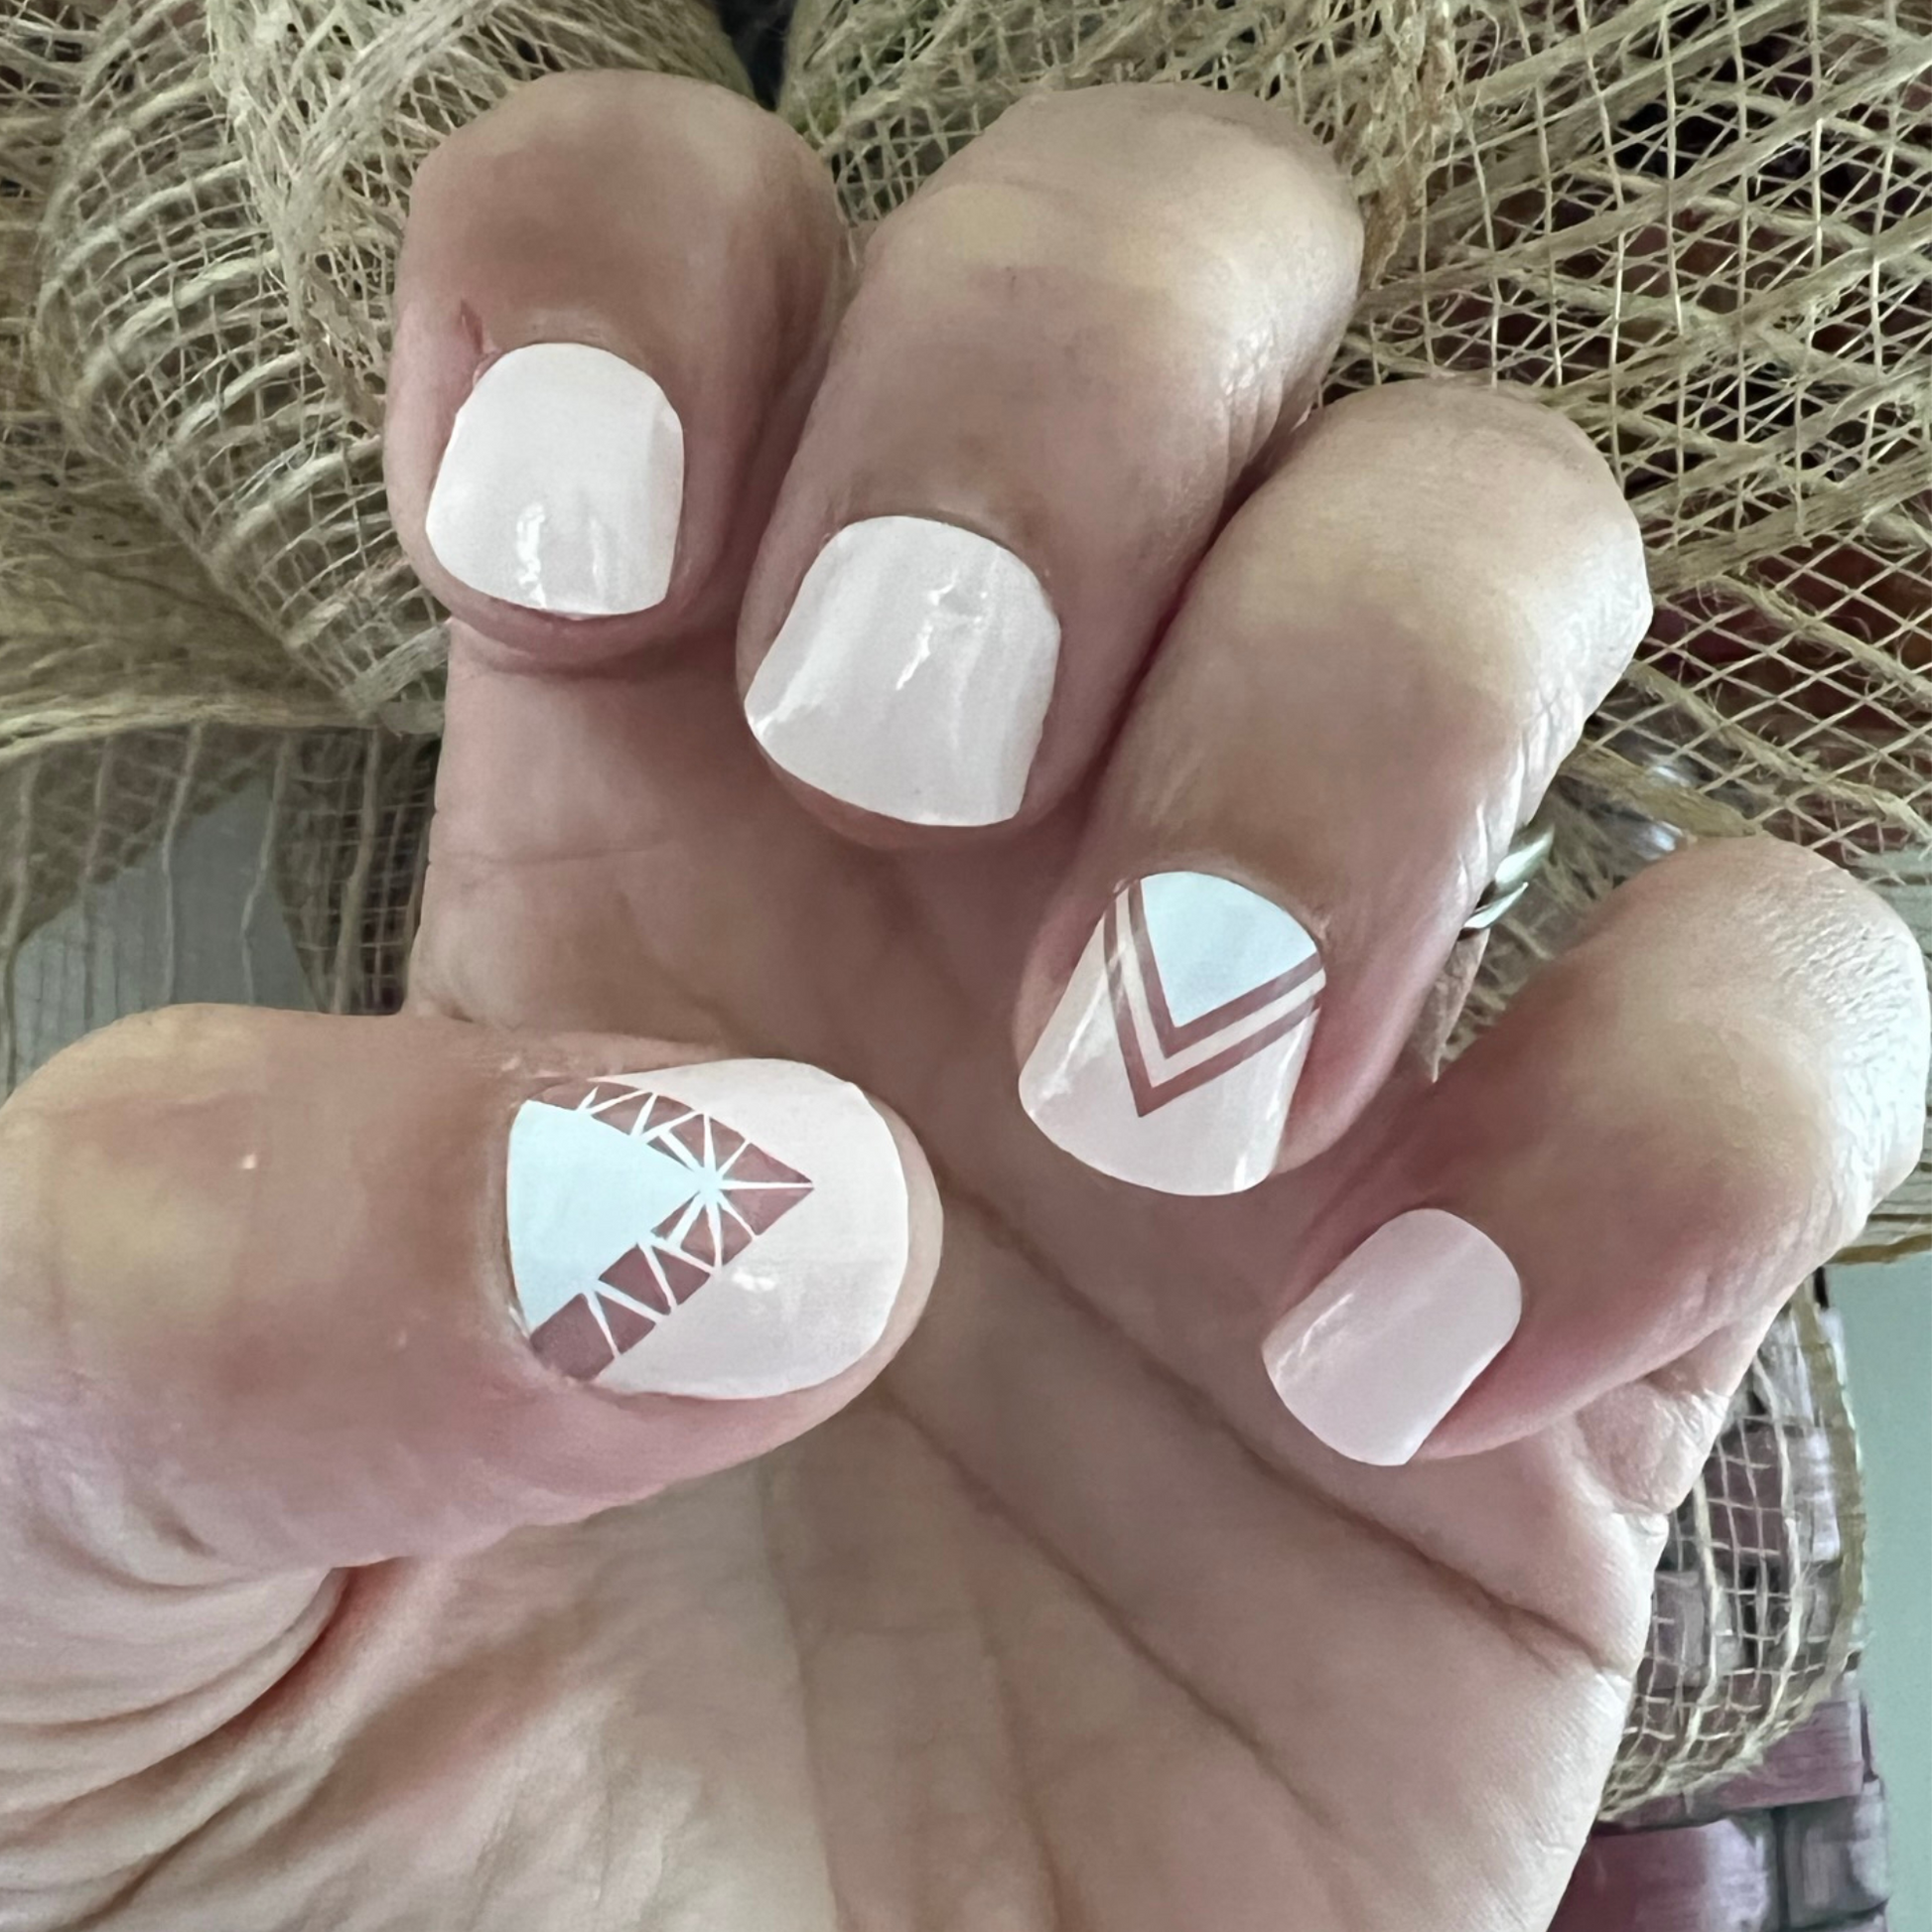 ballet pink nail wraps with white and translucent angular sections make this a modern twist on the classic french manicure.  nail wraps are a fast and easy home manicure